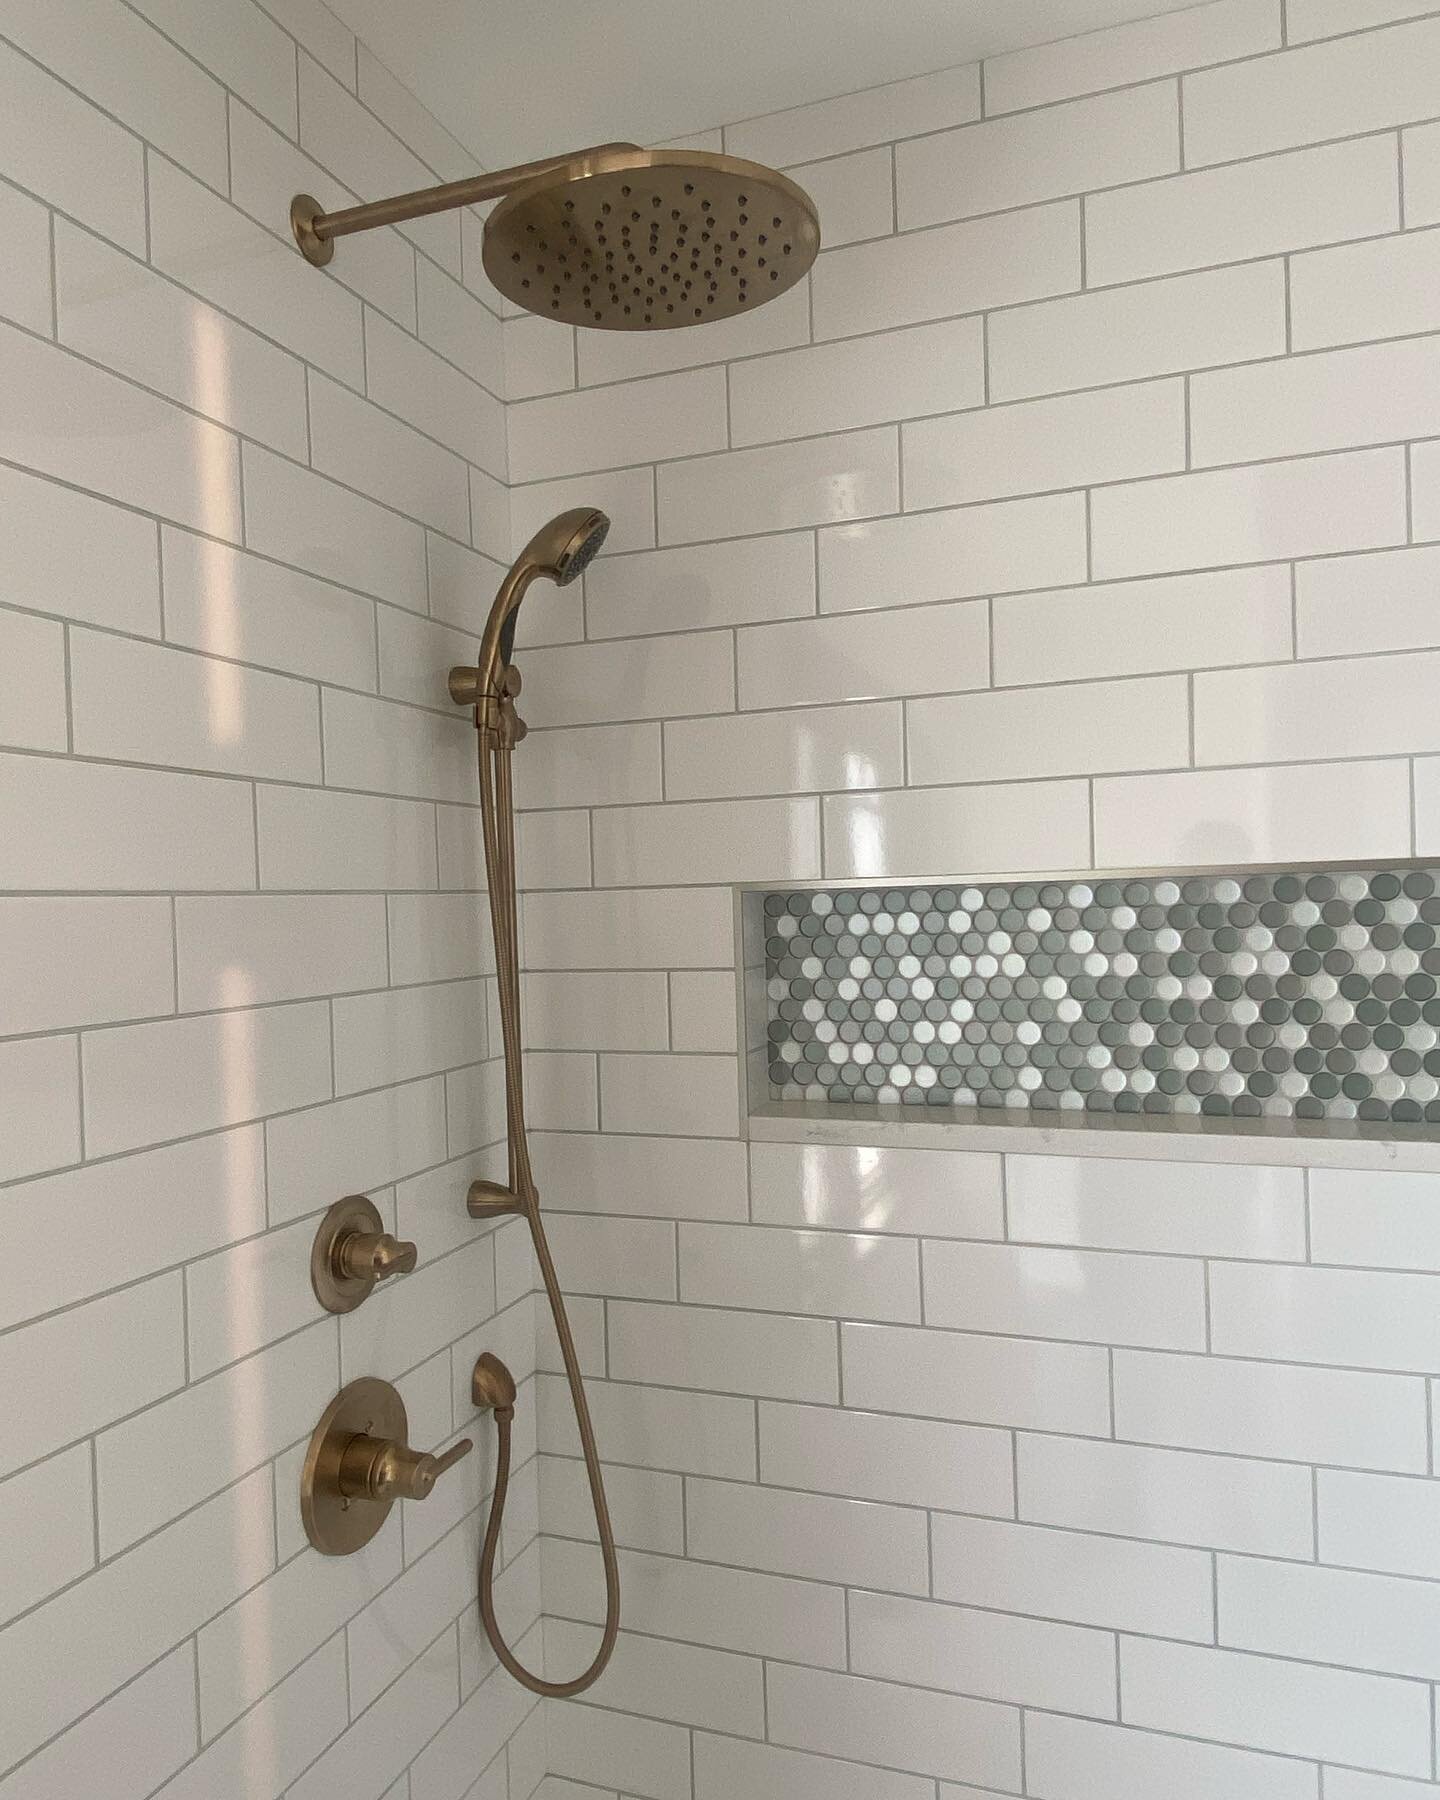 A little pop of colour 💚
-
#yegreno #yeglife #dreamhome #yegrenovations #yeghomes #yeg #yegcontractor #loveit #dreamshower #pennyrounds #goldhardware #champagne #yegbath #bathroomdesign #dreamshower